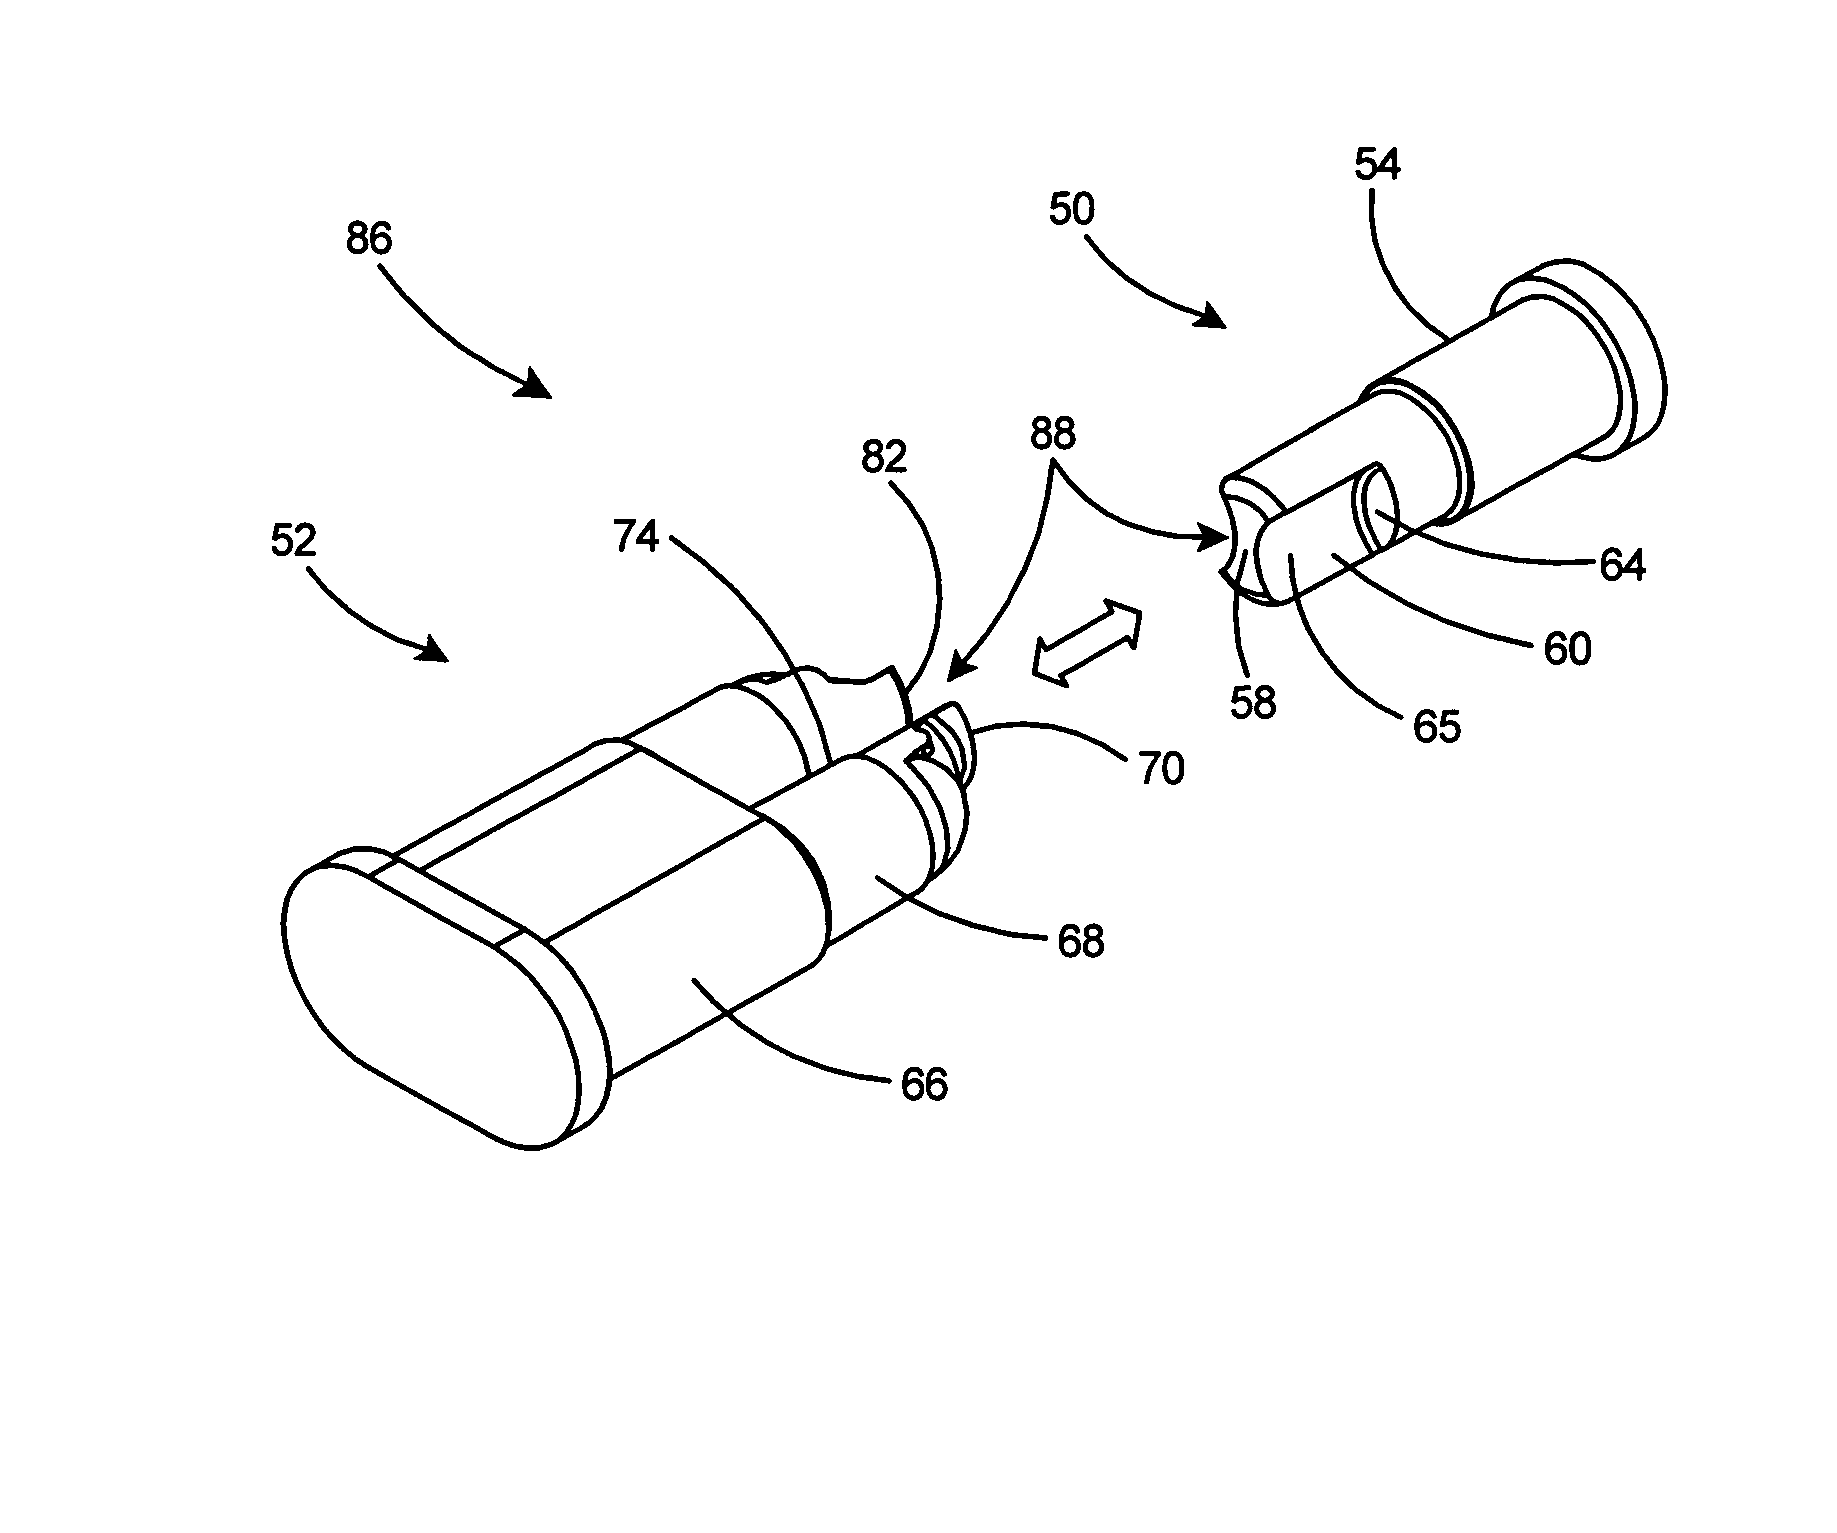 Coring system and method for manufacturing a one-piece die cast electrical connector body